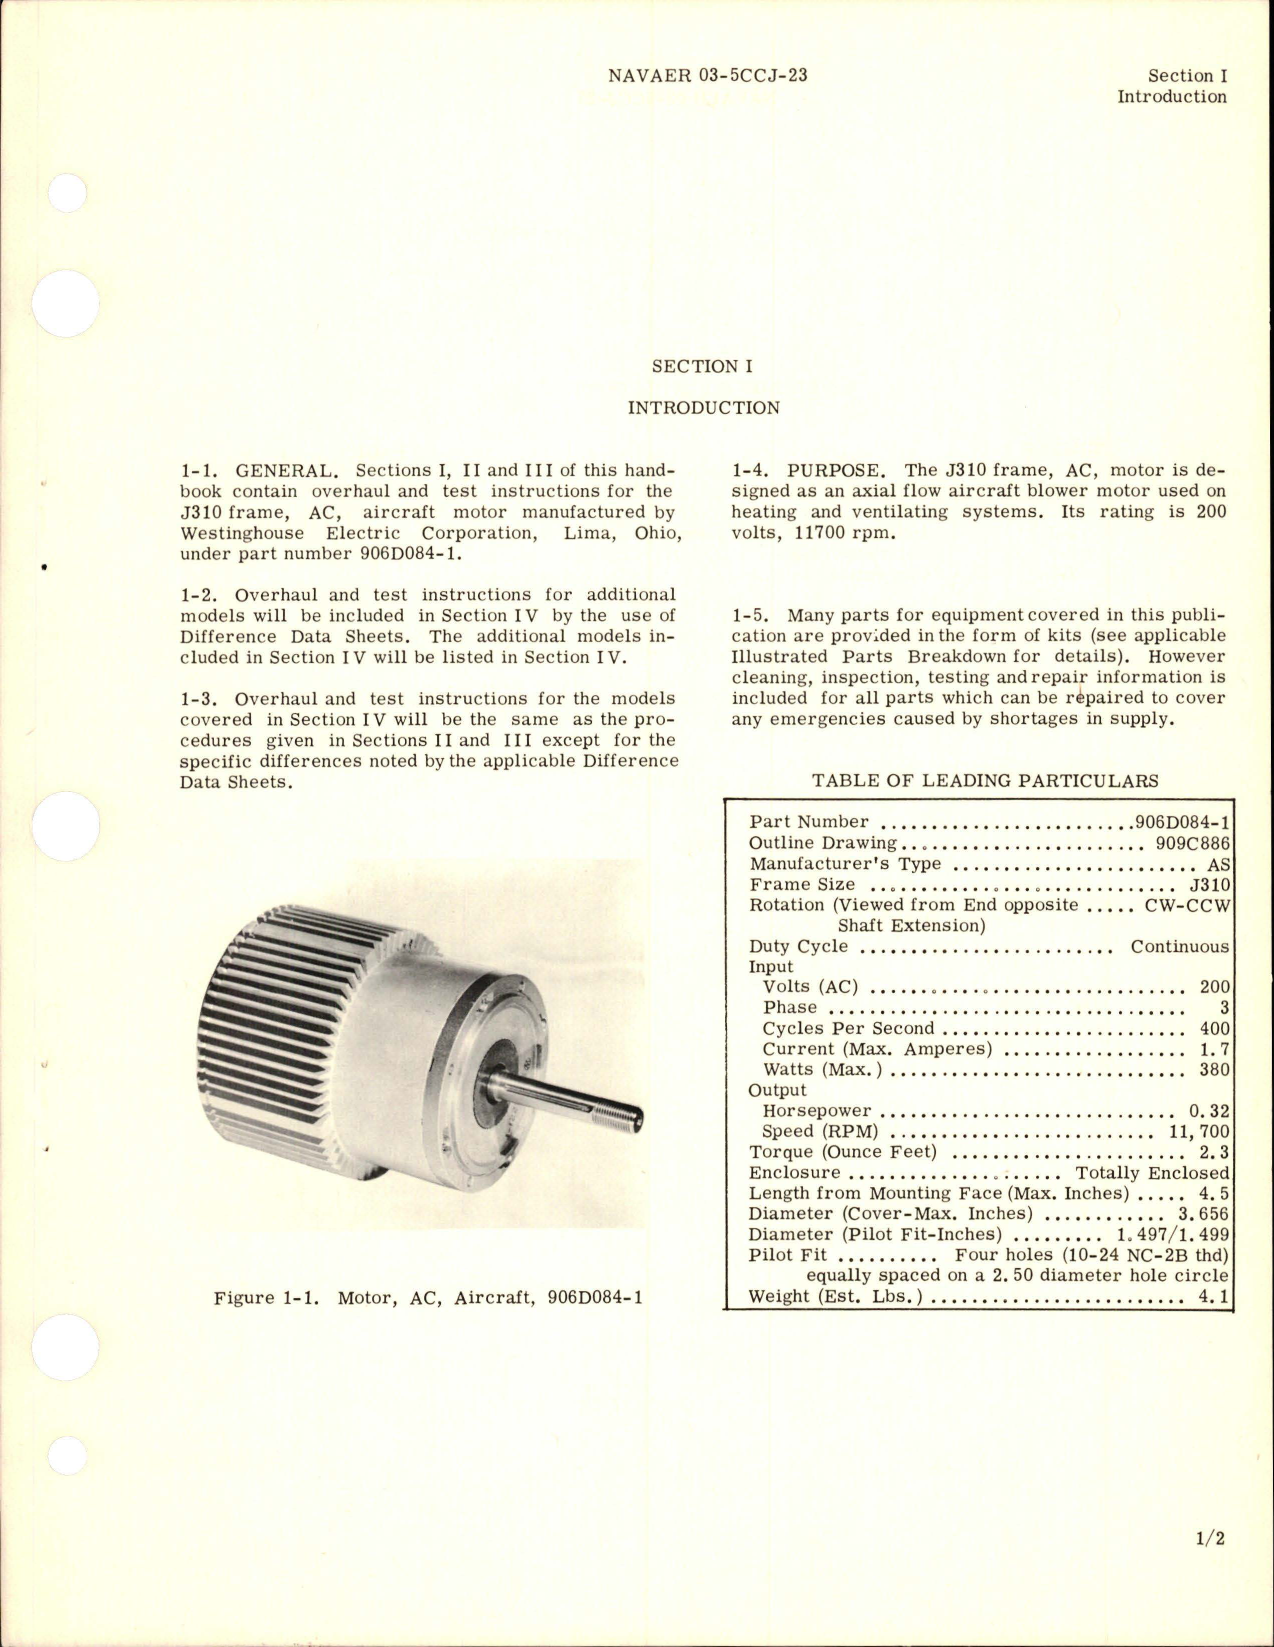 Sample page 5 from AirCorps Library document: Overhaul Instructions for AC Motor - Part 906D084-1